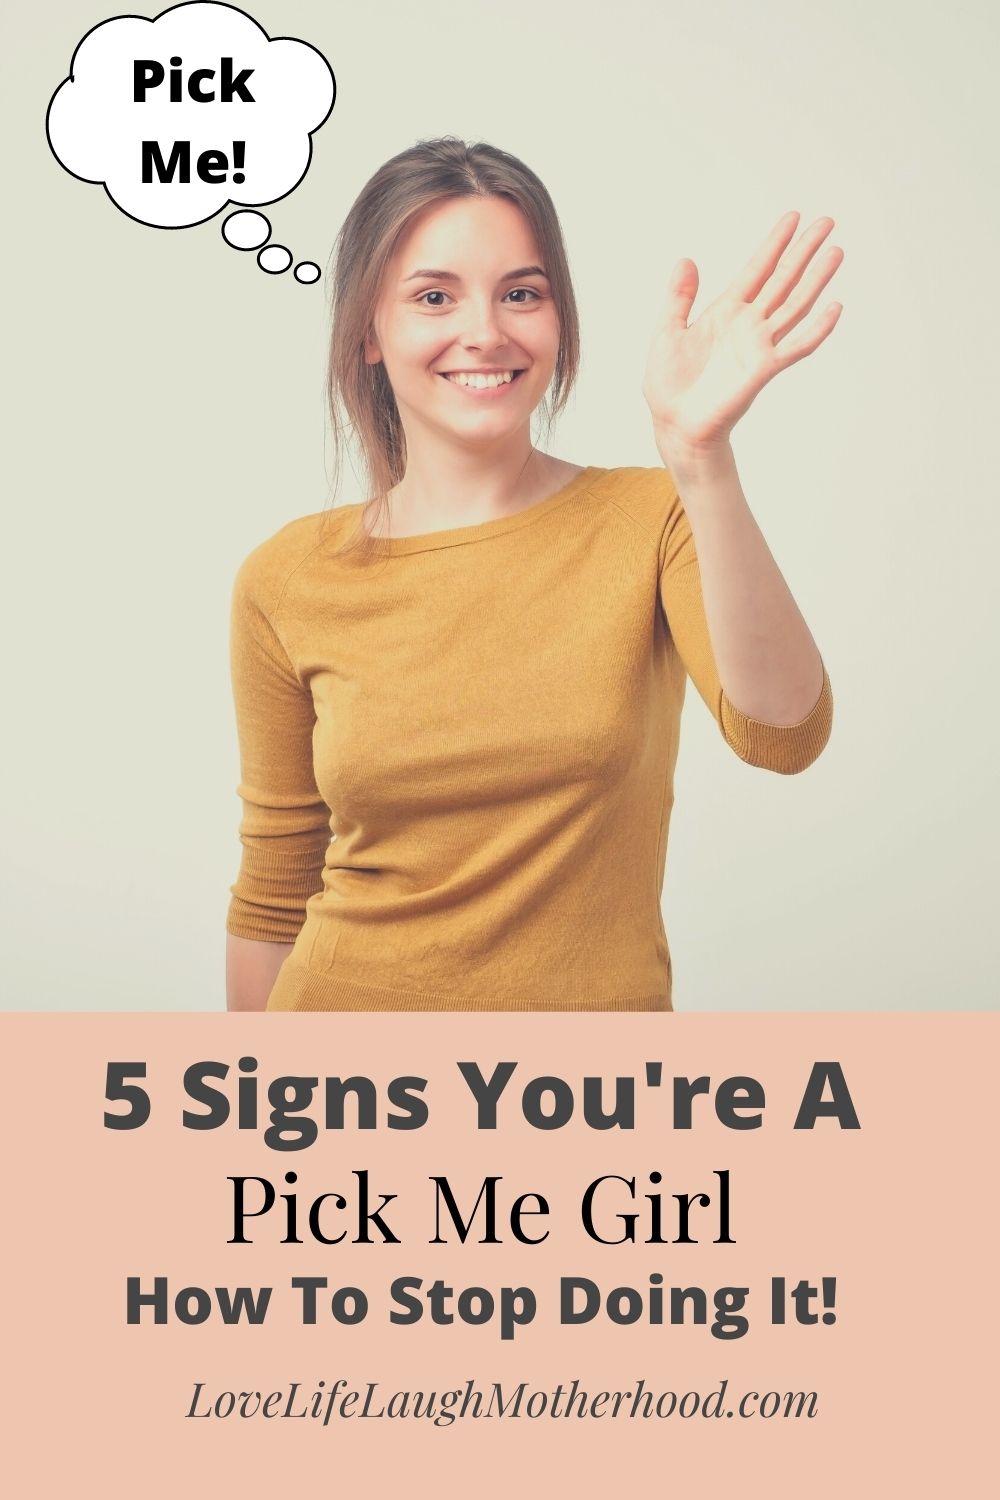 Pick me girl meaning